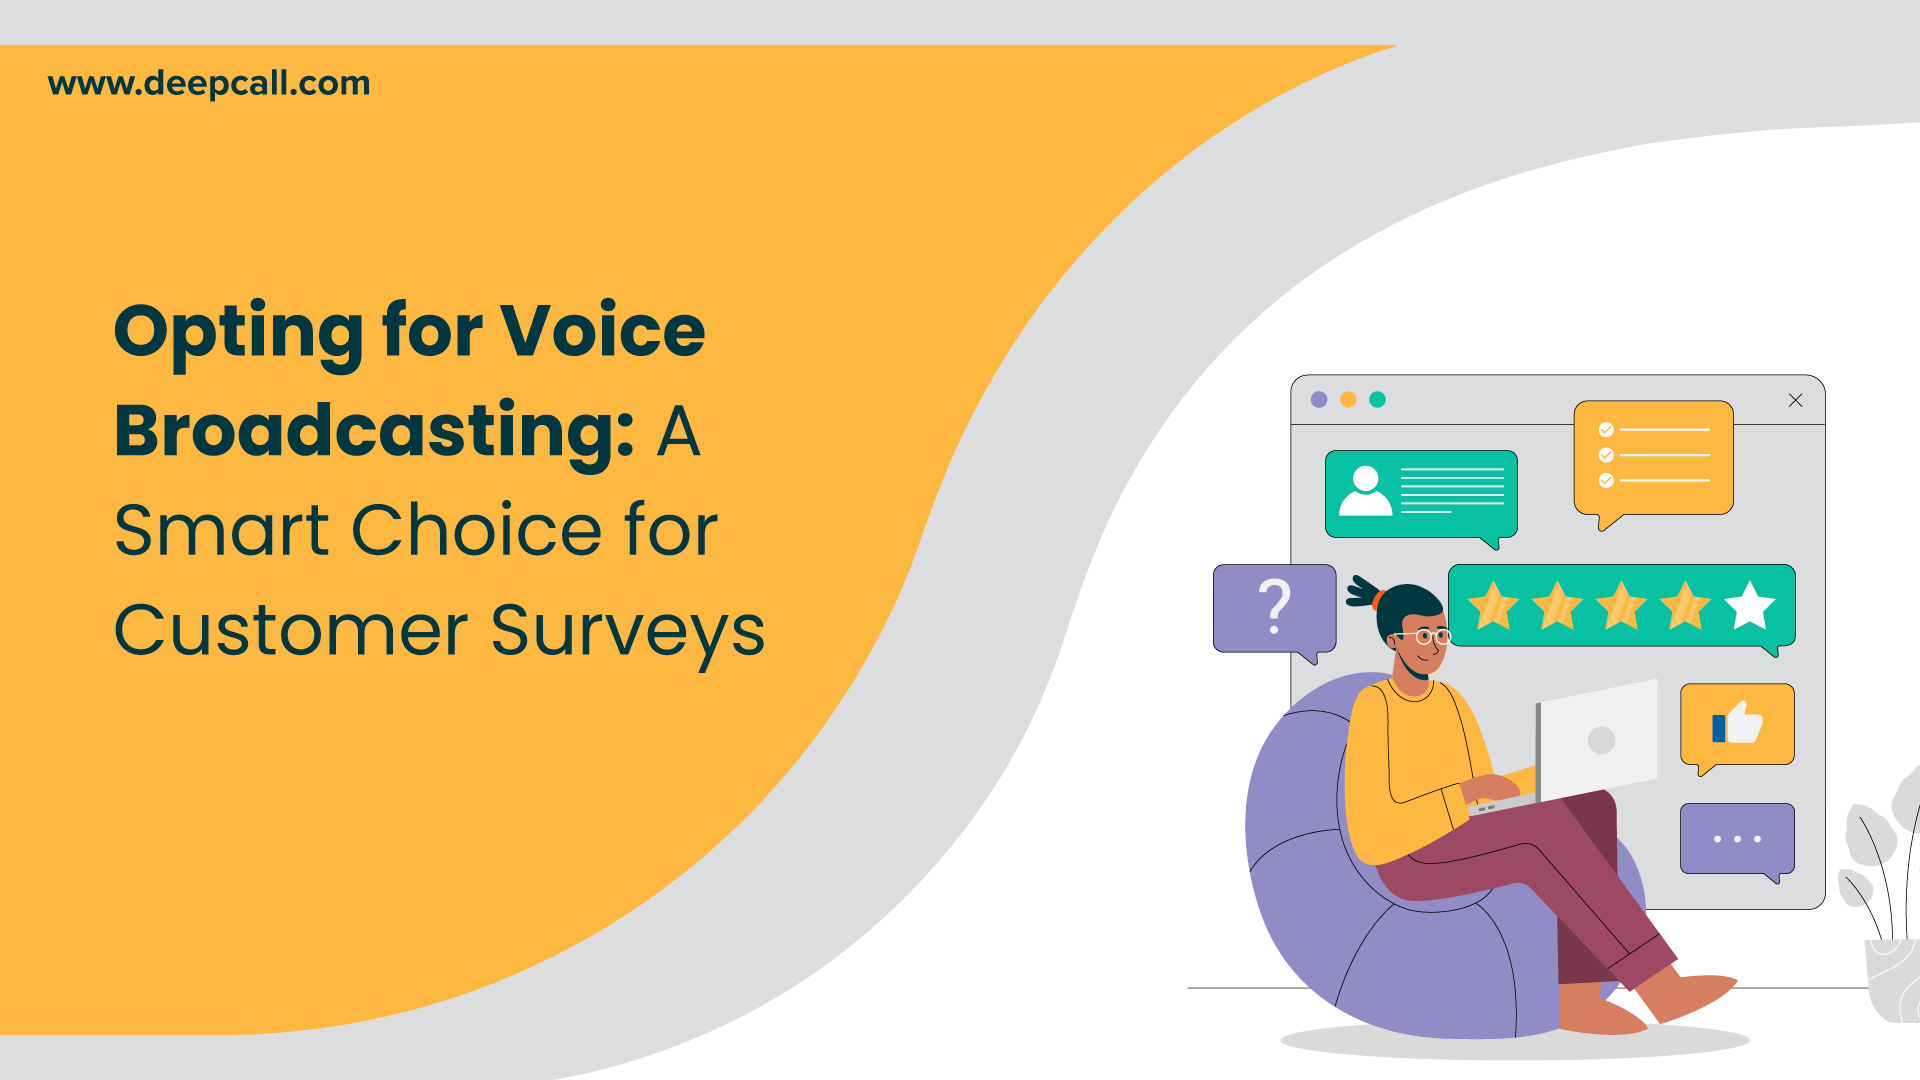 Opting for Voice Broadcasting: A Smart Choice for Customer Surveys